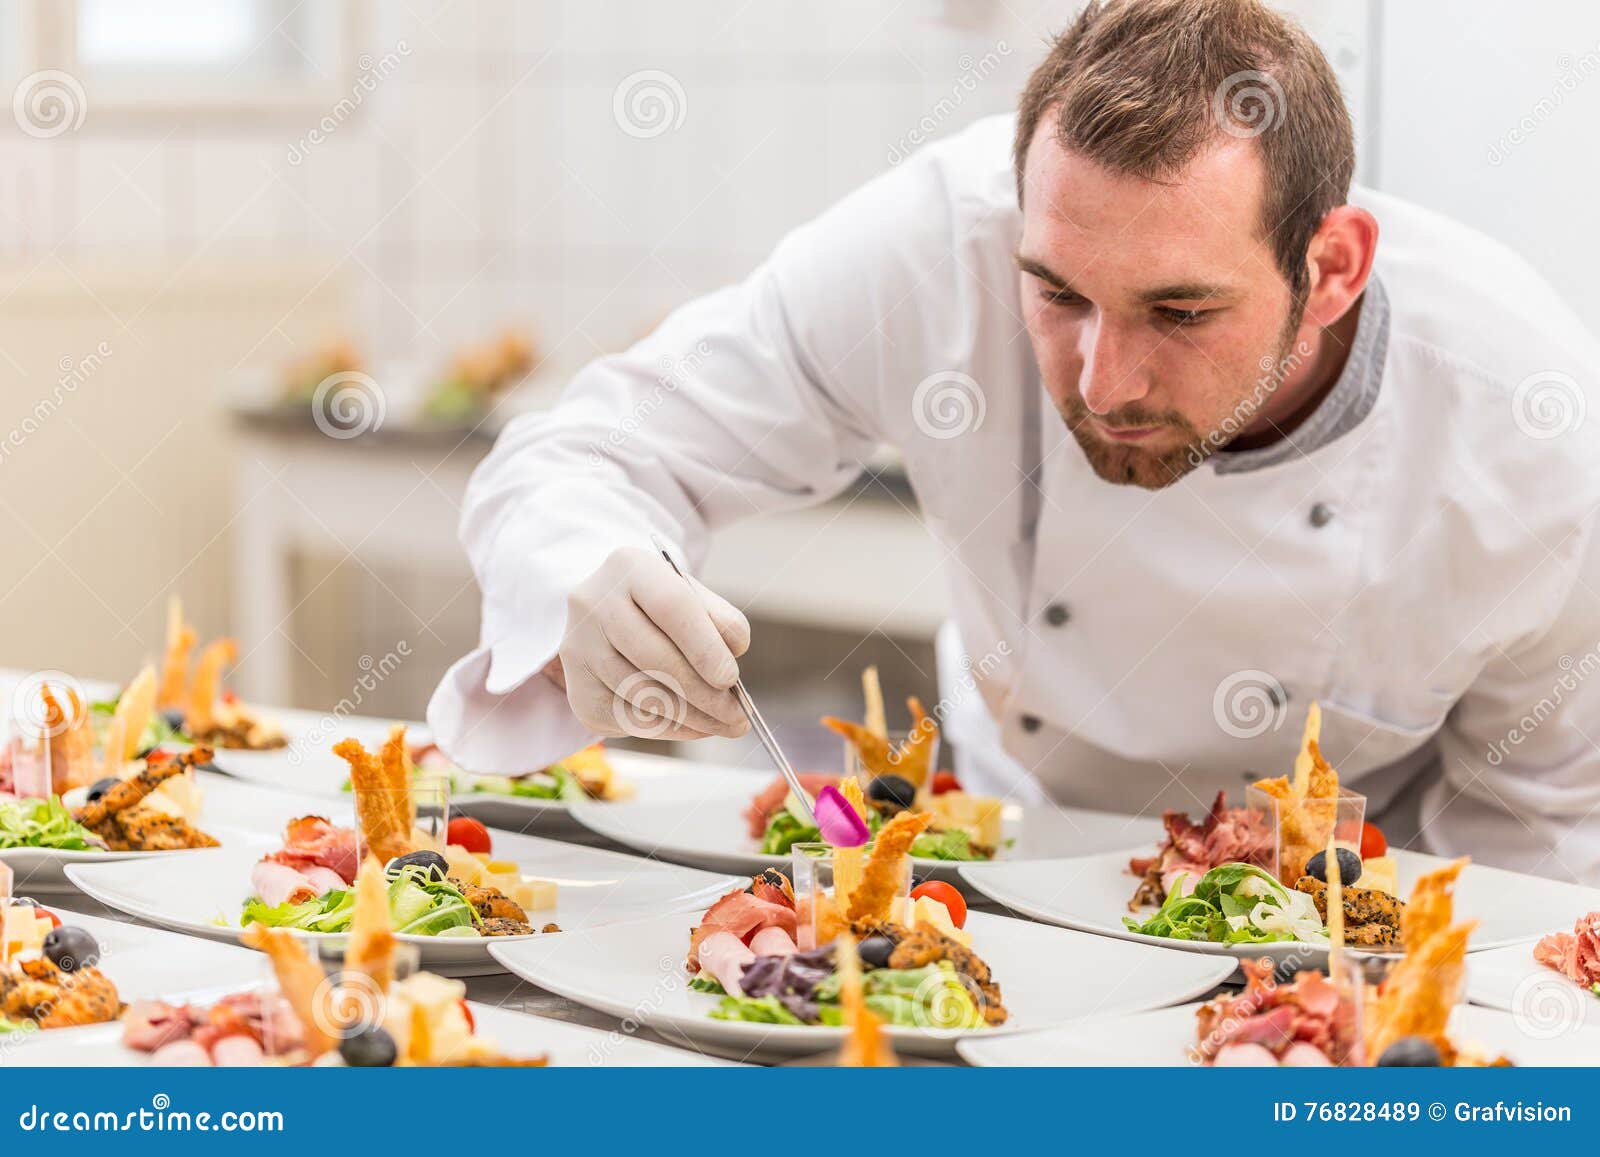 chef garnishing his appetizer plate